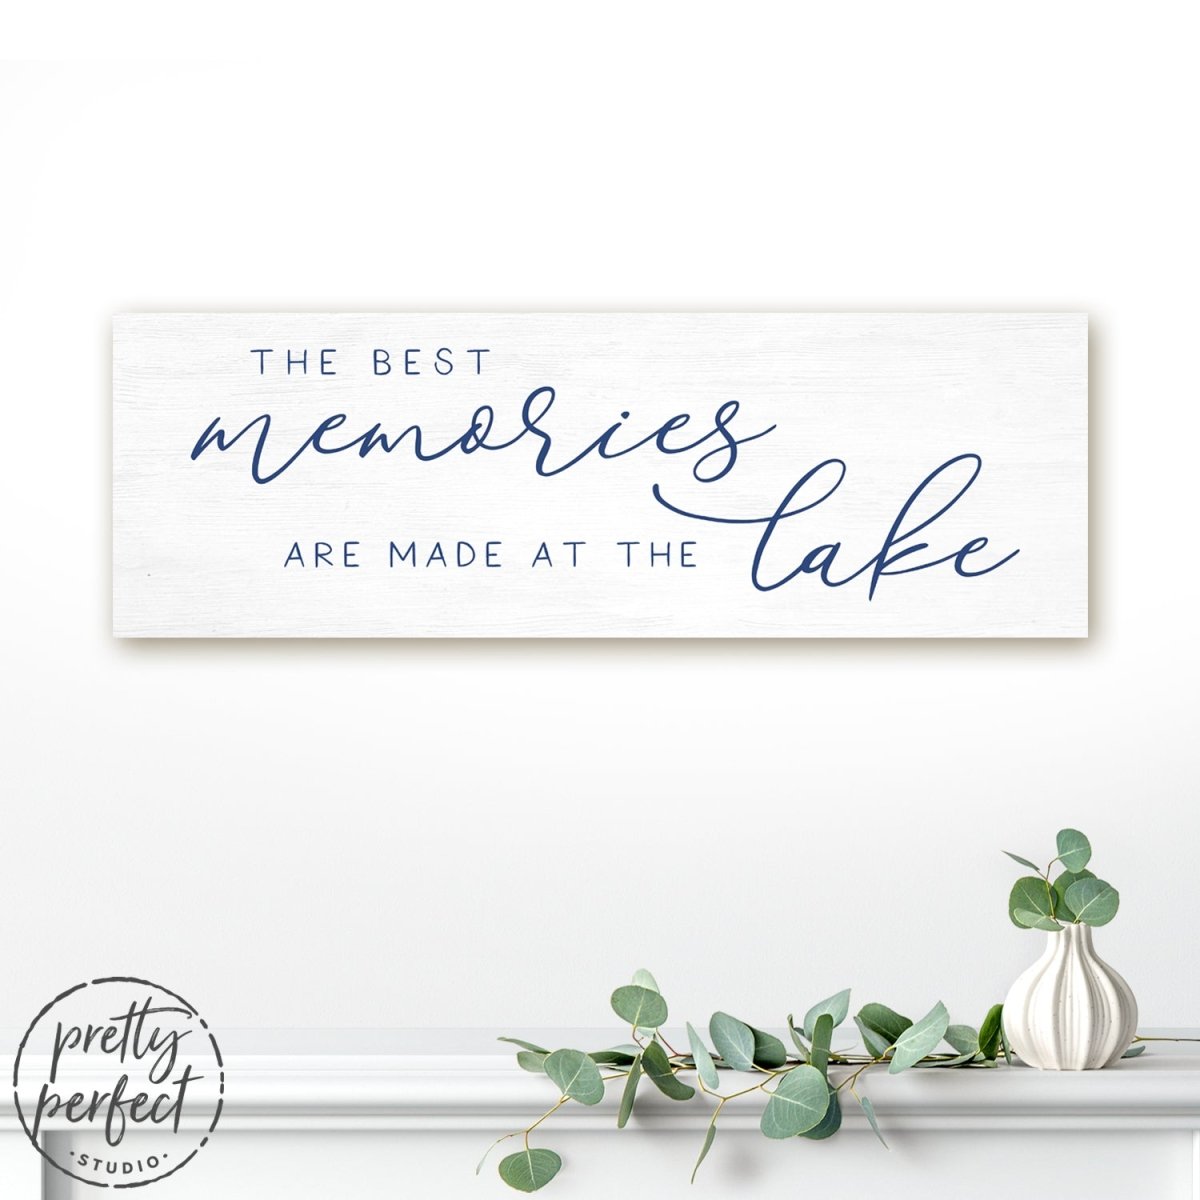 The Best Memories Are Made At The Lake Wall Art Hanging on Wall Above Shelf - Pretty Perfect Studio